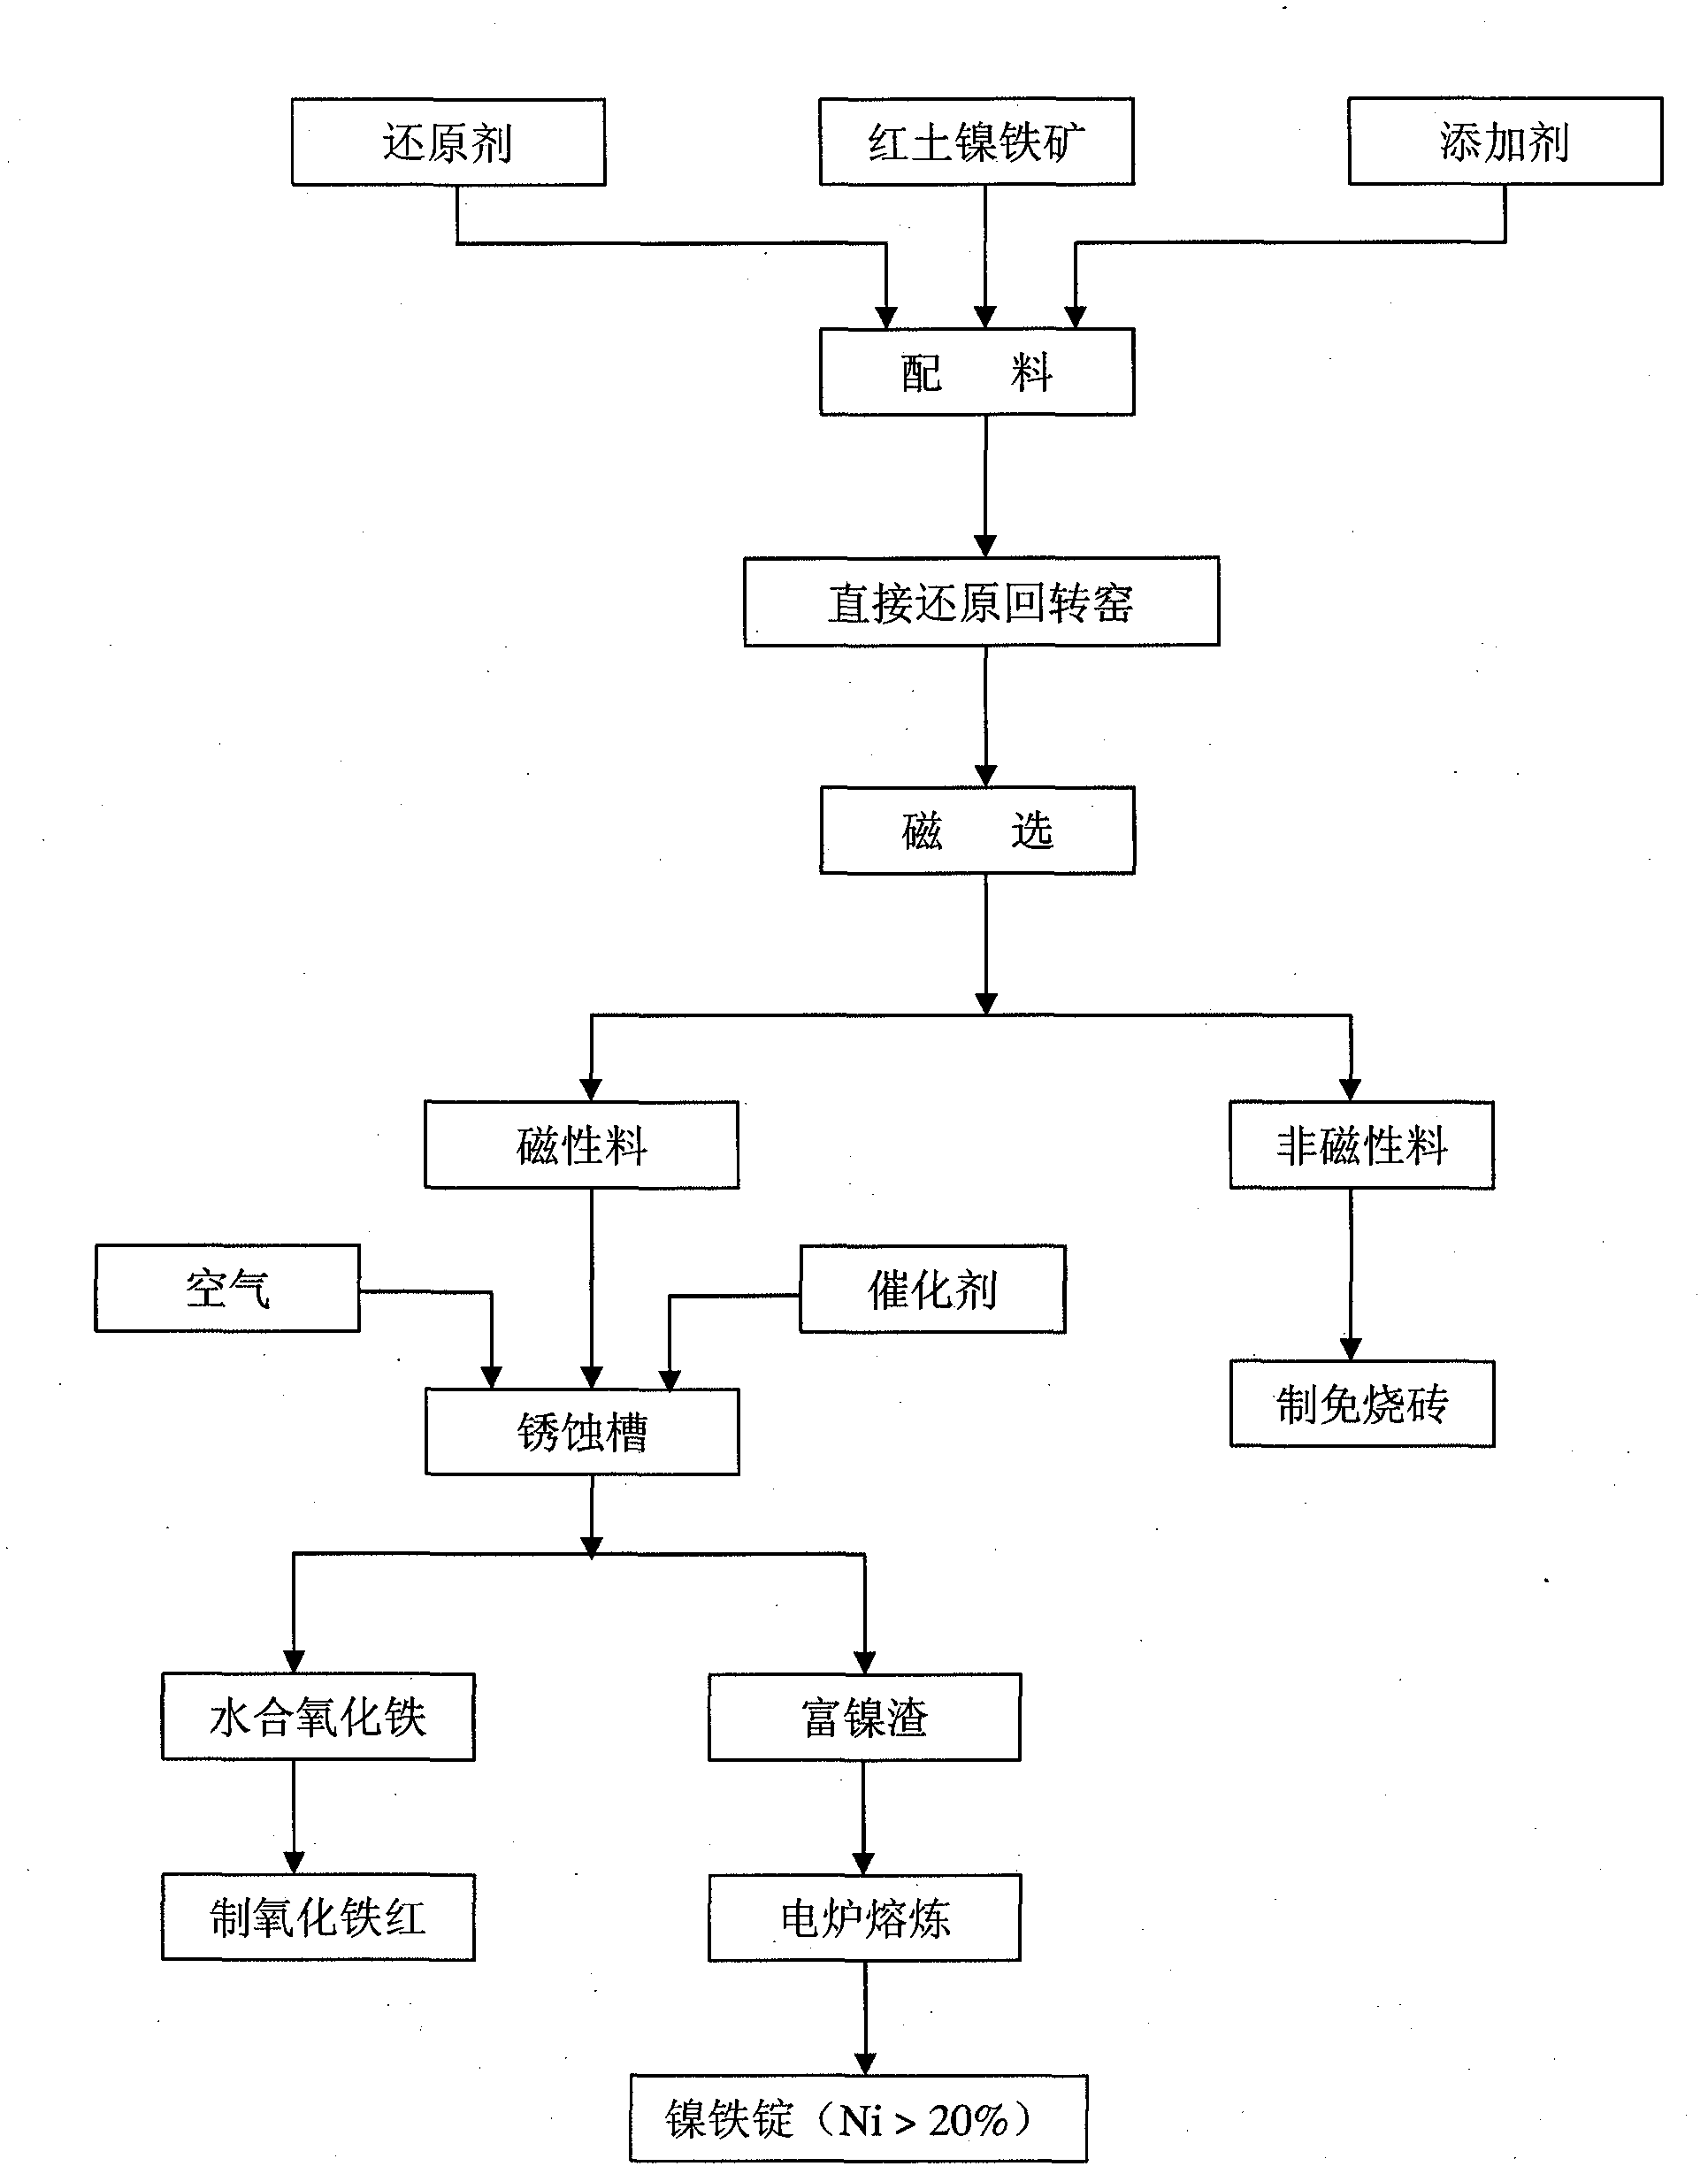 Method for reducing nickel ore by using reducing rotary kiln and producing ferronickel by rusting electric furnace